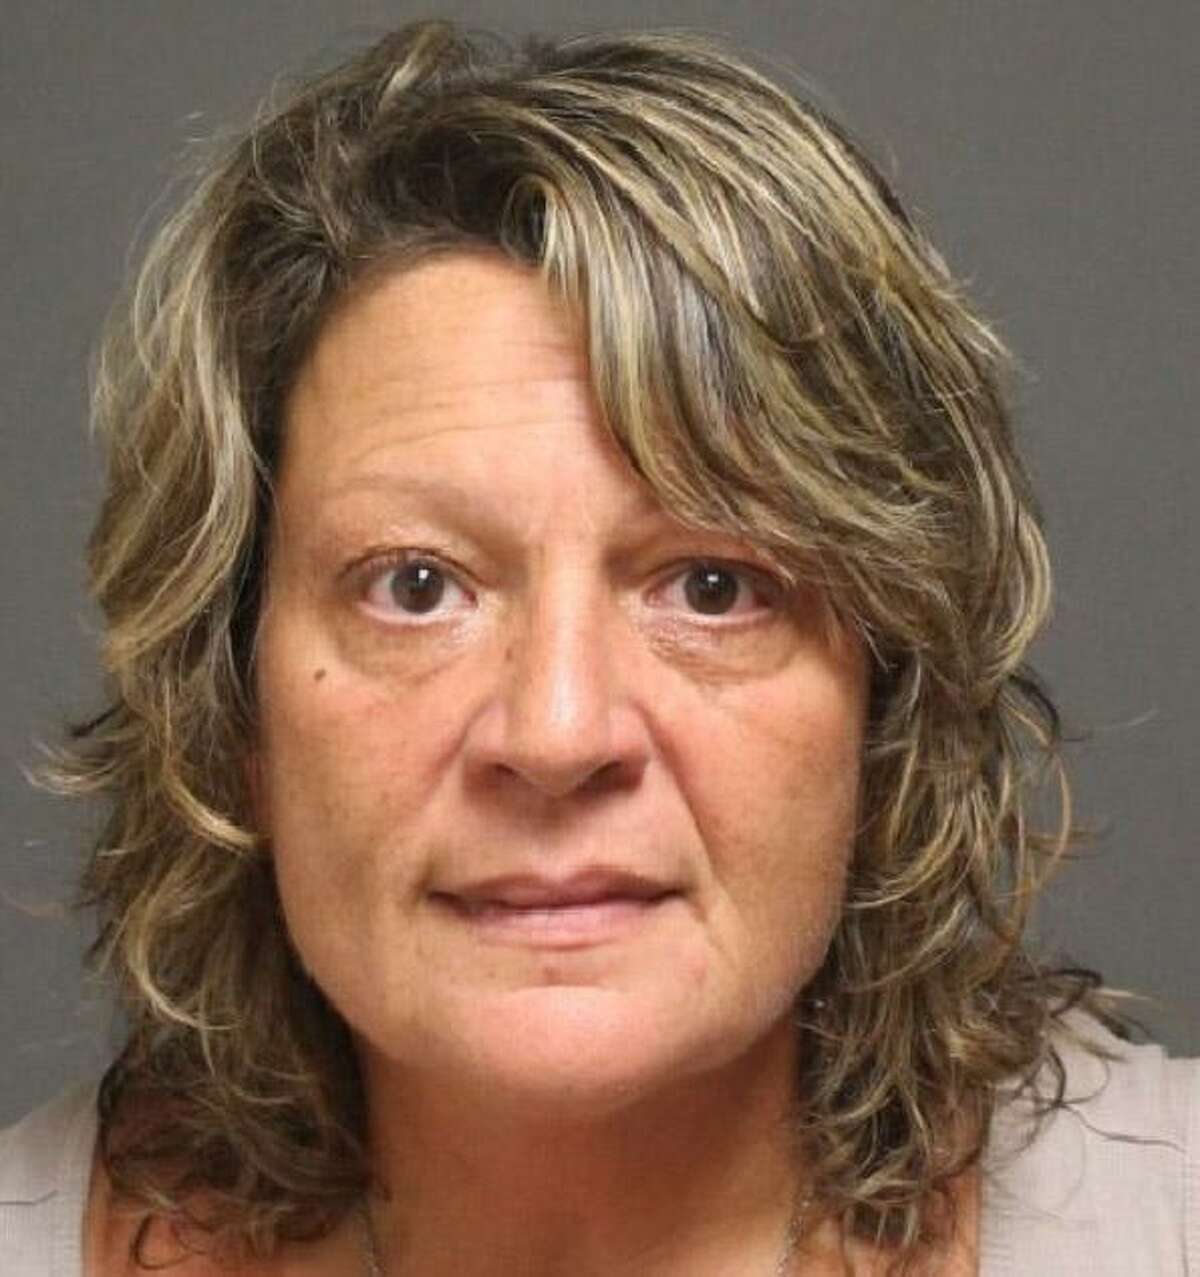 Carol Cardillo, 54, of Edgewood Road, has been charged with manslaughter in connection with the death of an infant at an unlicensed daycare center she ran at her home in Fairfield